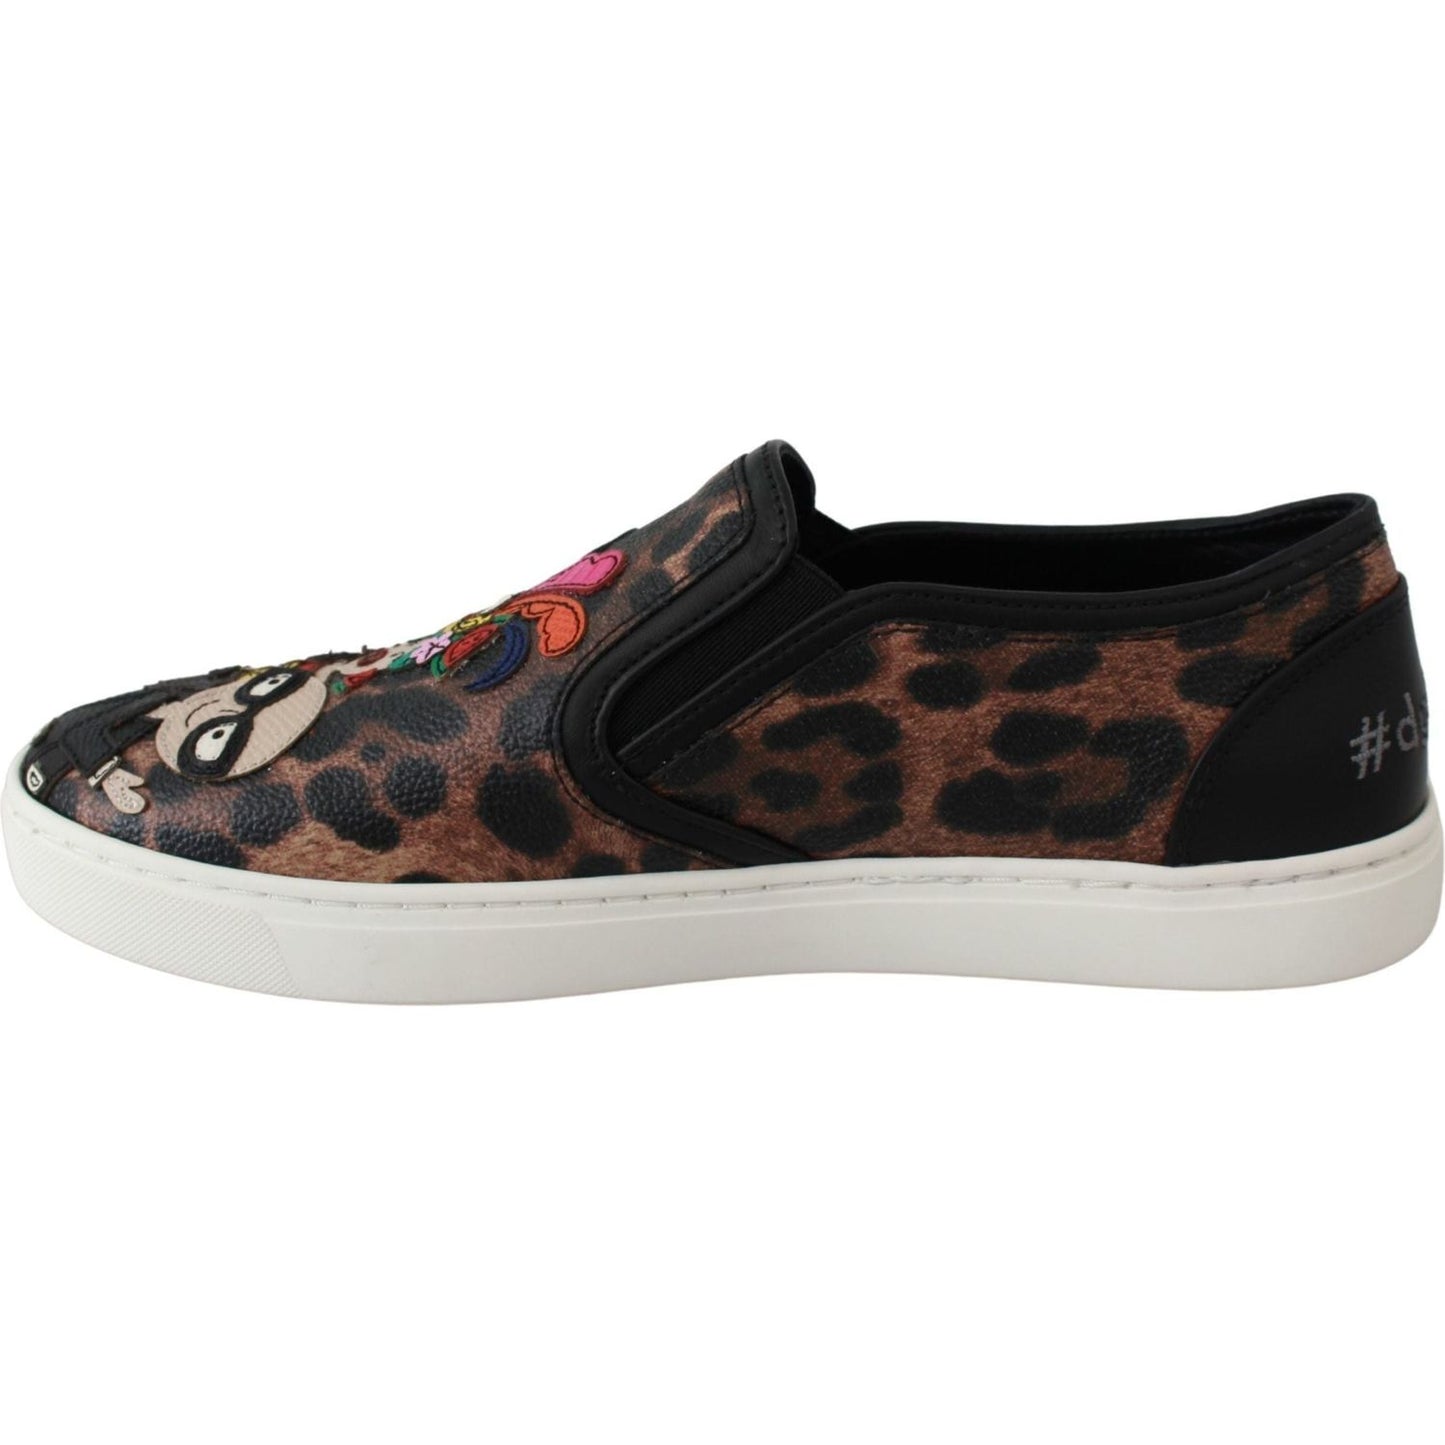 Dolce & Gabbana Elegant Leopard Print Loafers for Sophisticated Style leather-leopard-dgfamily-loafers-shoes-1